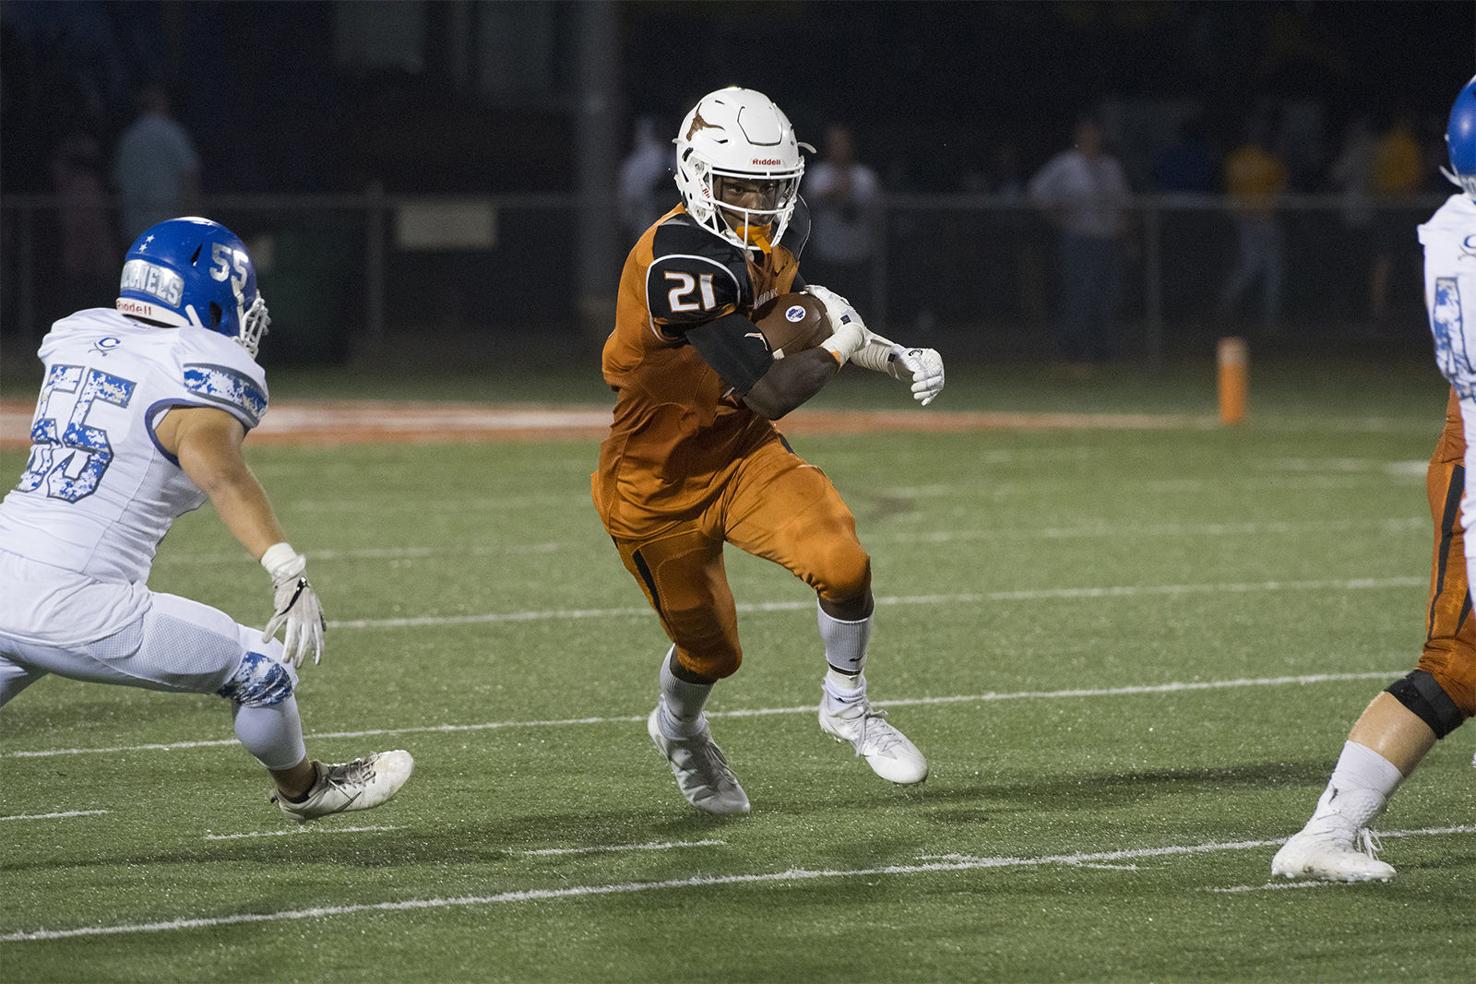 Kell prepared for another challenge at East Paulding | Cobb Football ...